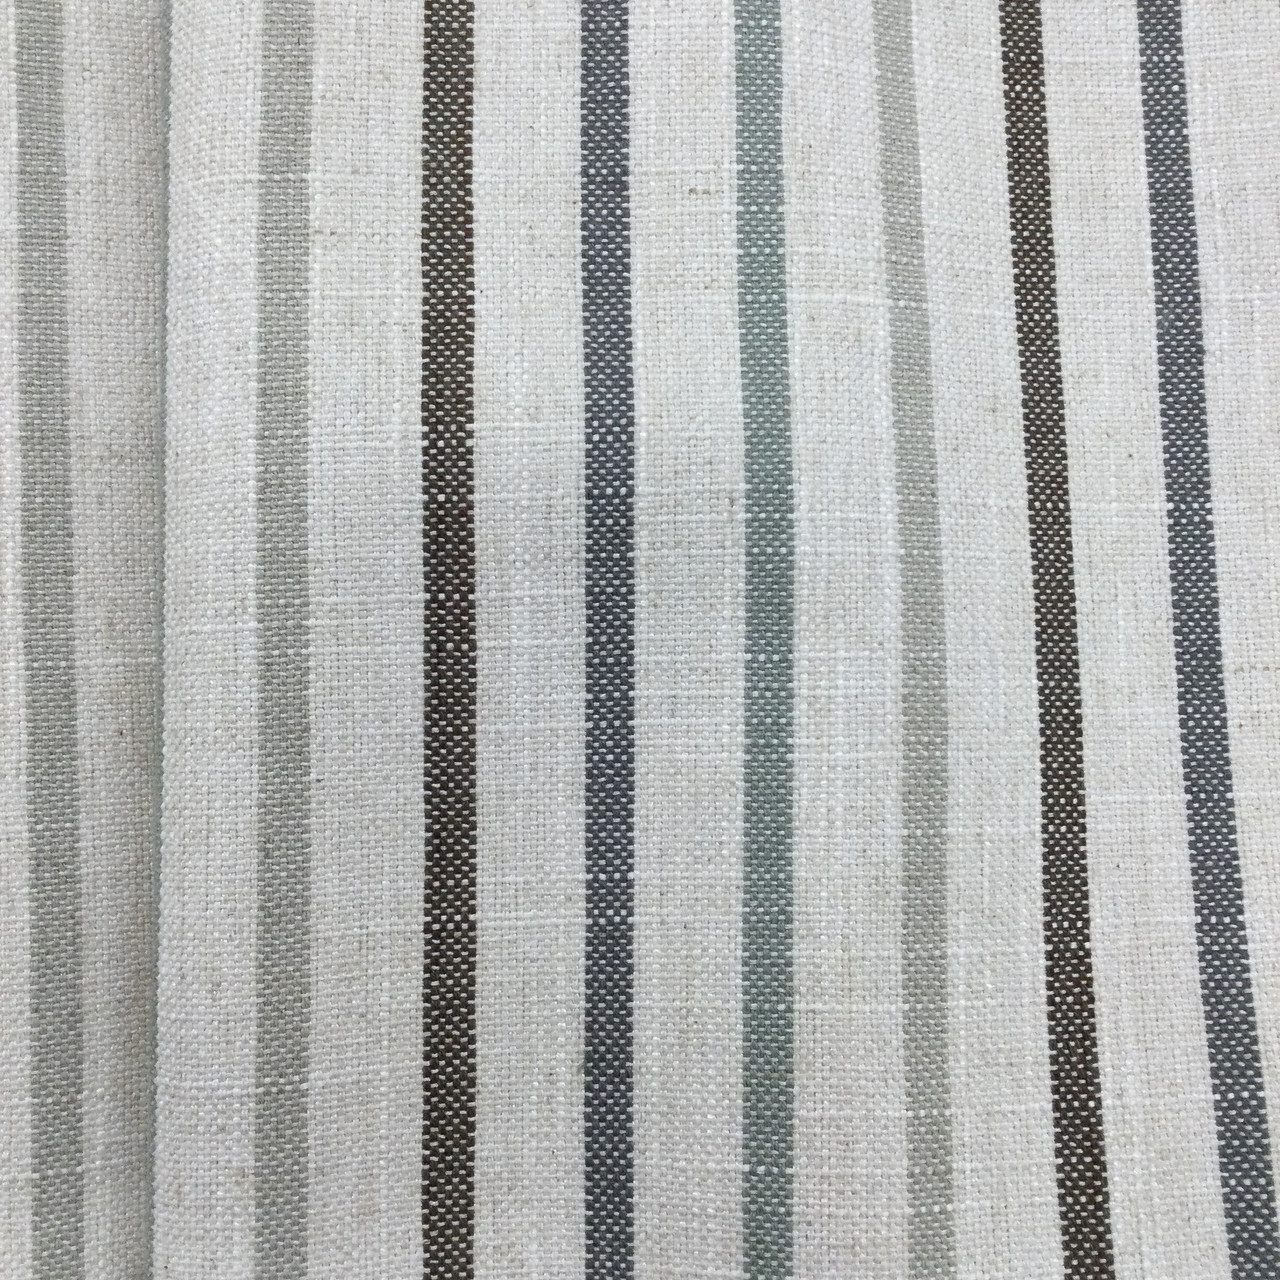 Vintage French Striped Linen Fabric by the Yard / Heavy Upholstery